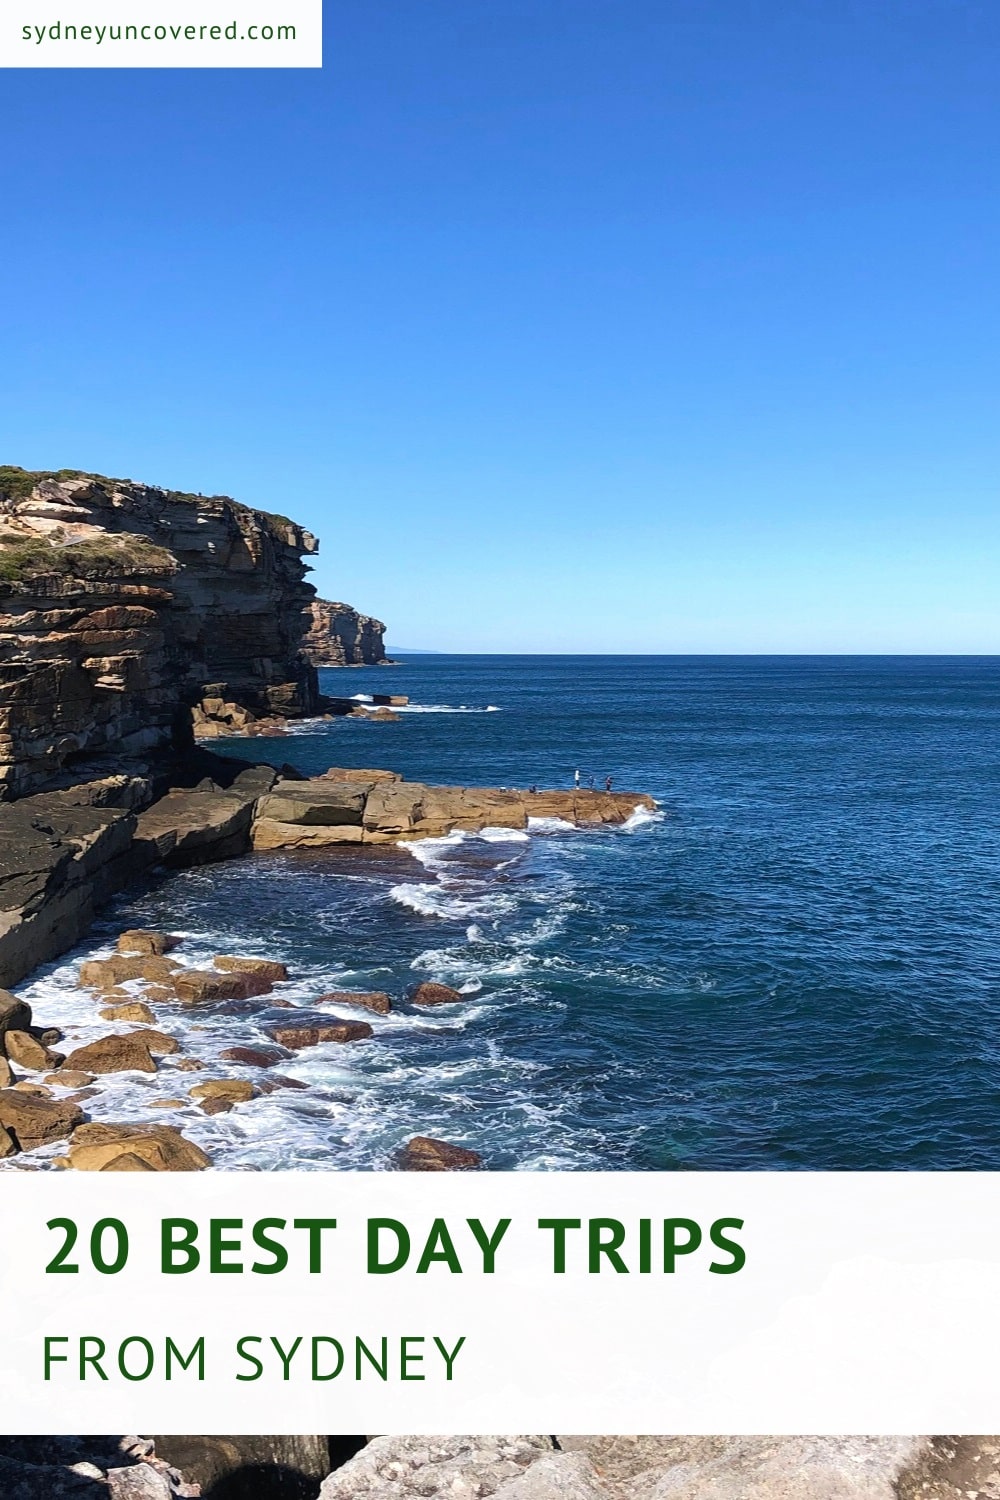 Day trips from Sydney